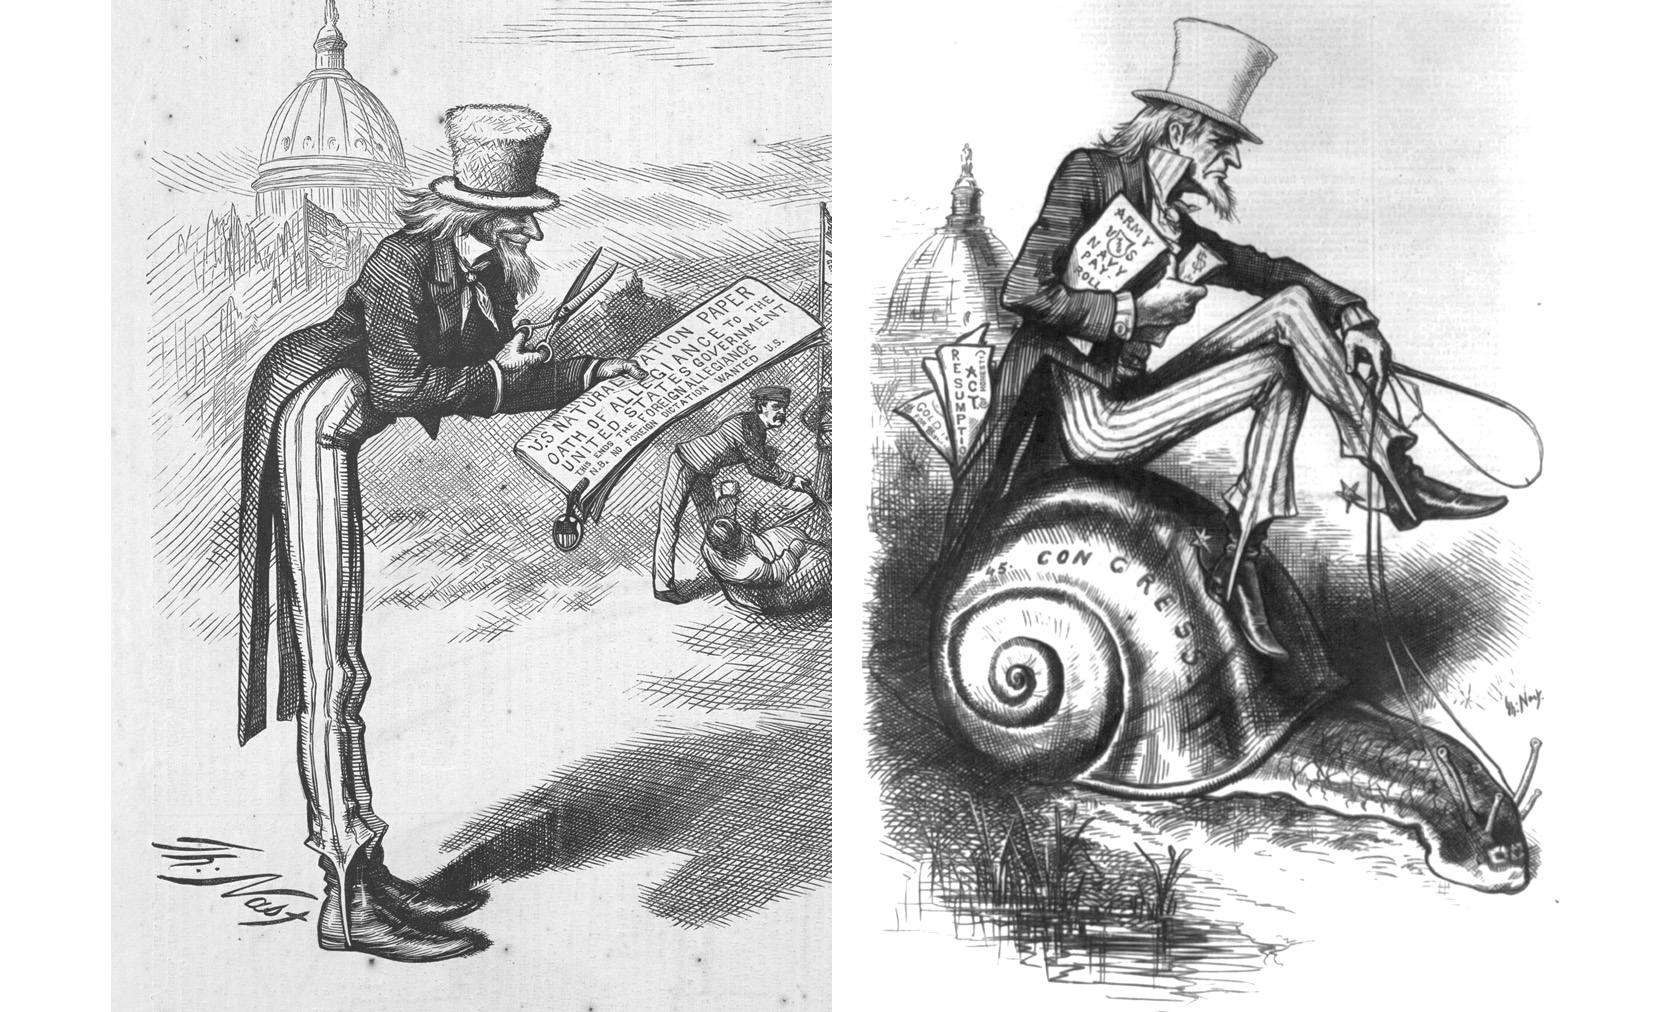 drawings of uncle sam with striped pants and a top hat